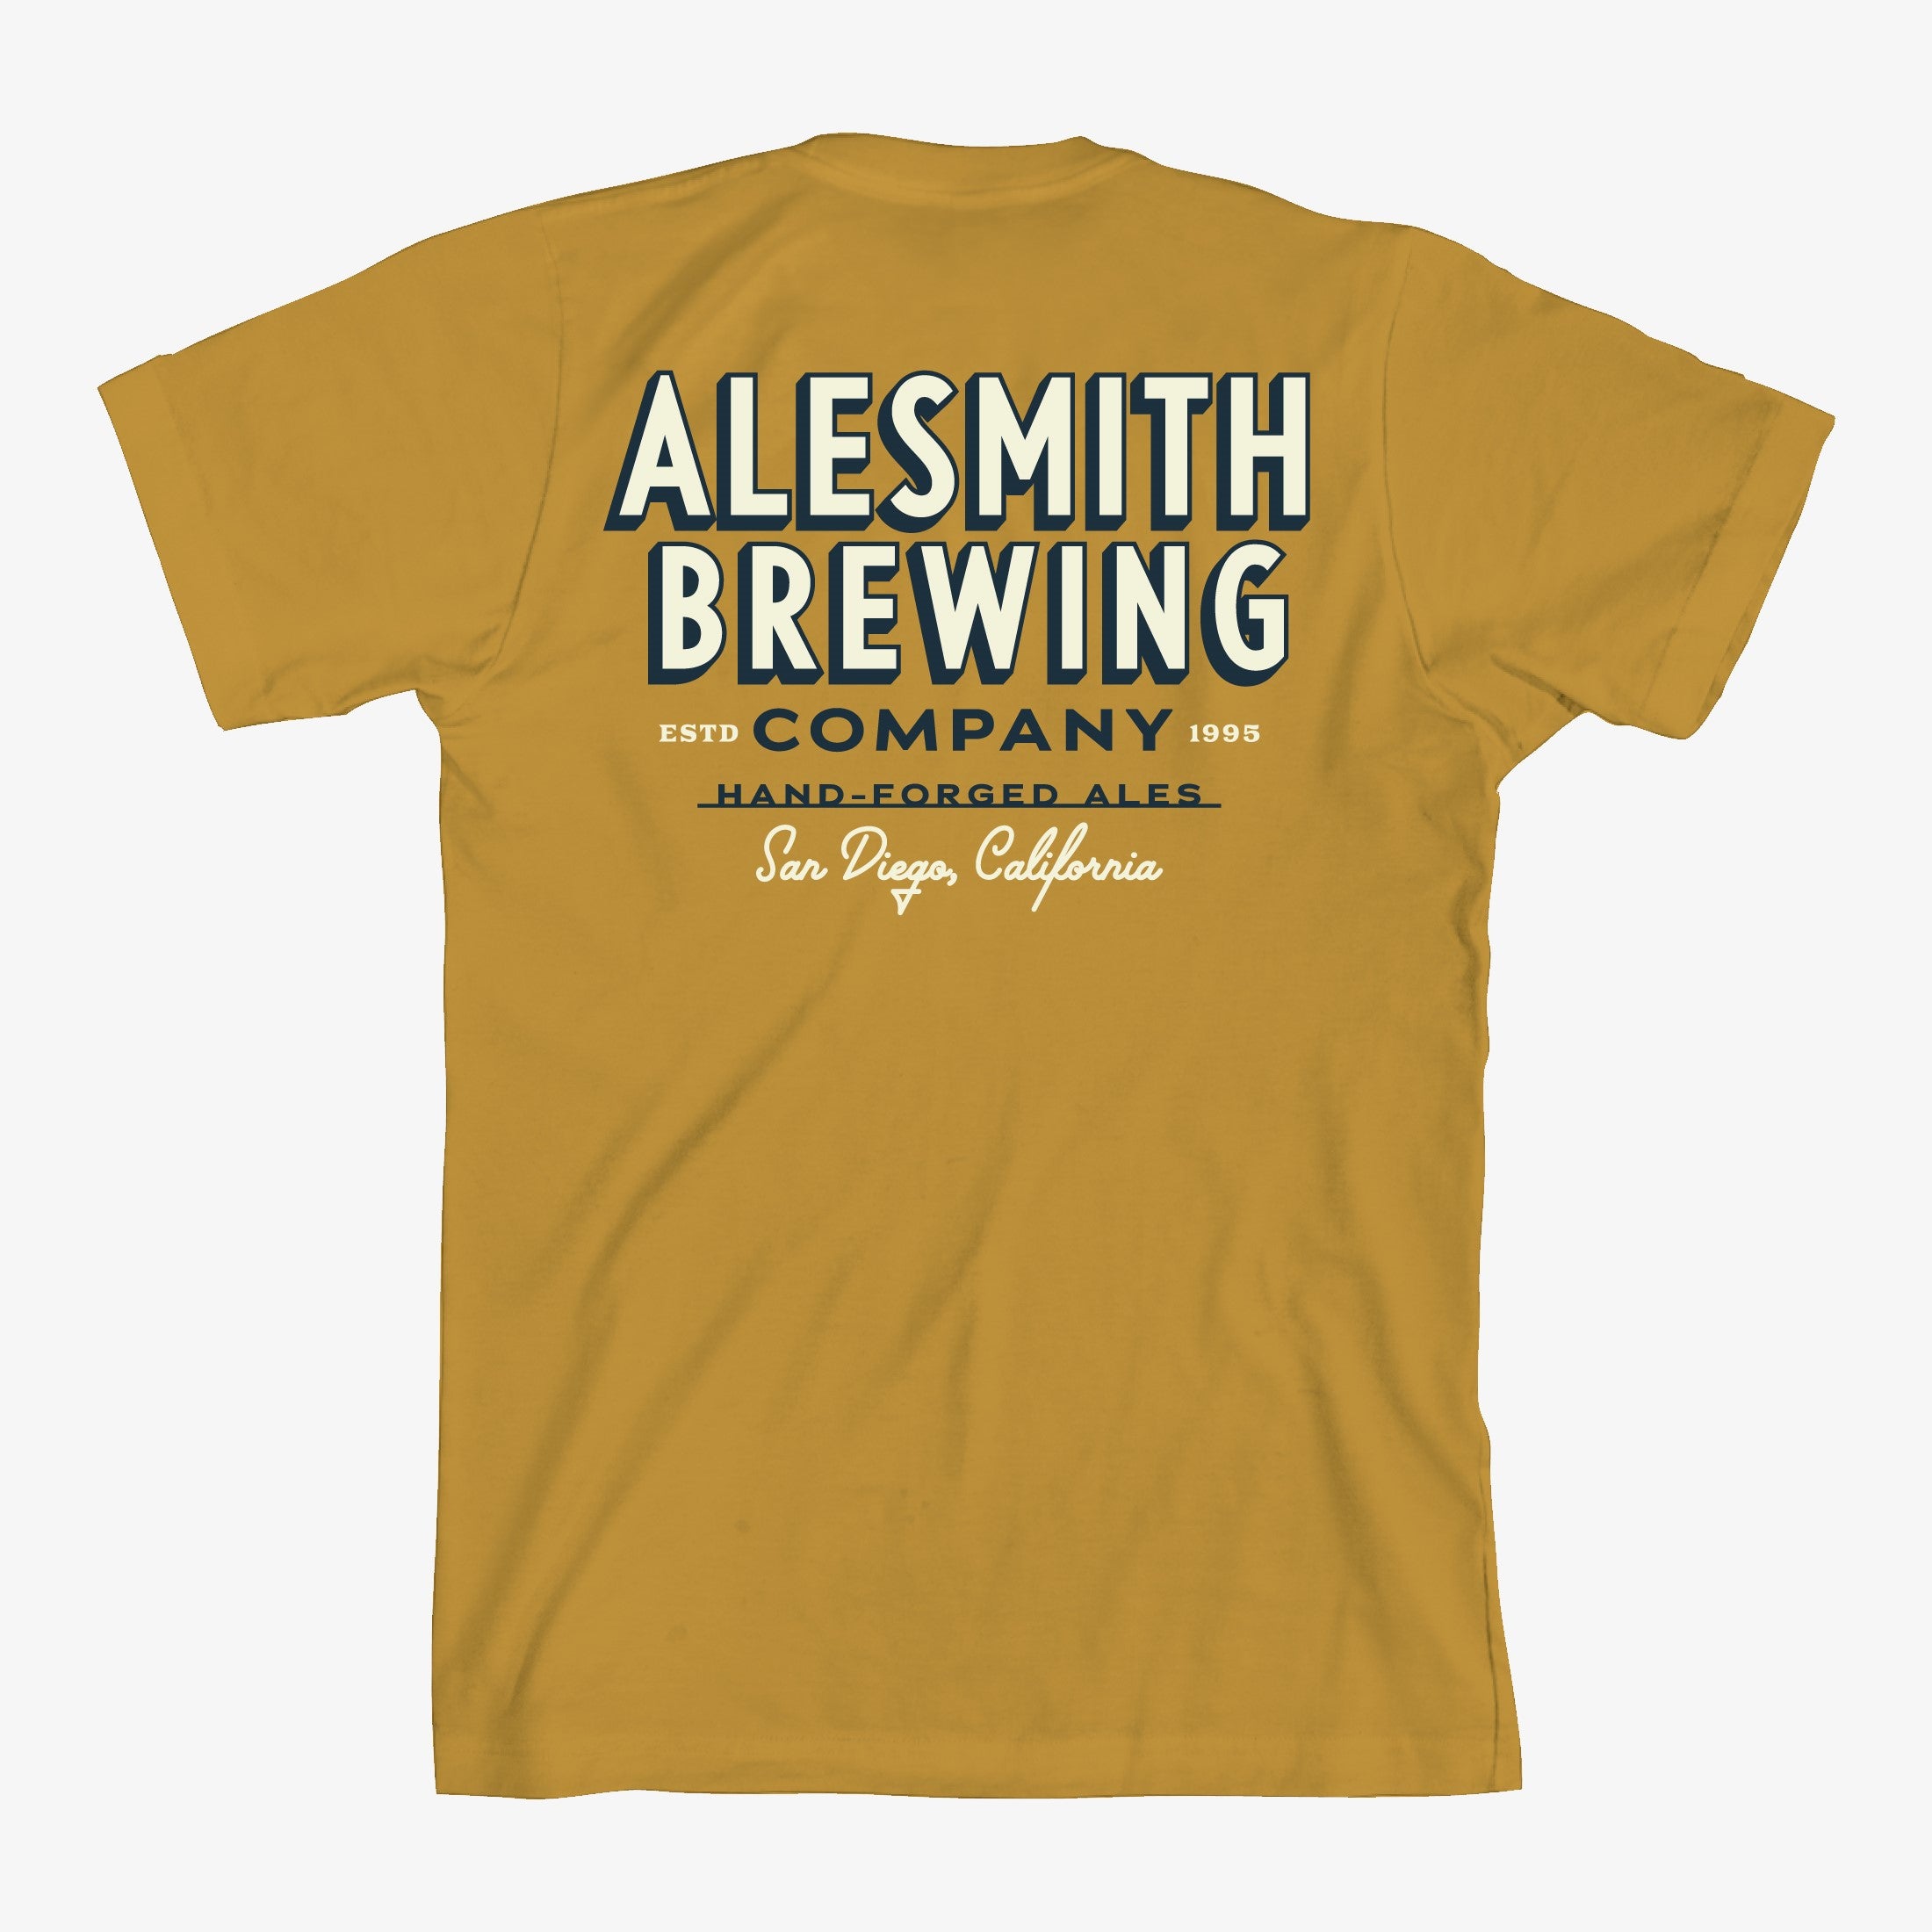 Beer Camp Tee - Gold - AleSmith Brewing Co.